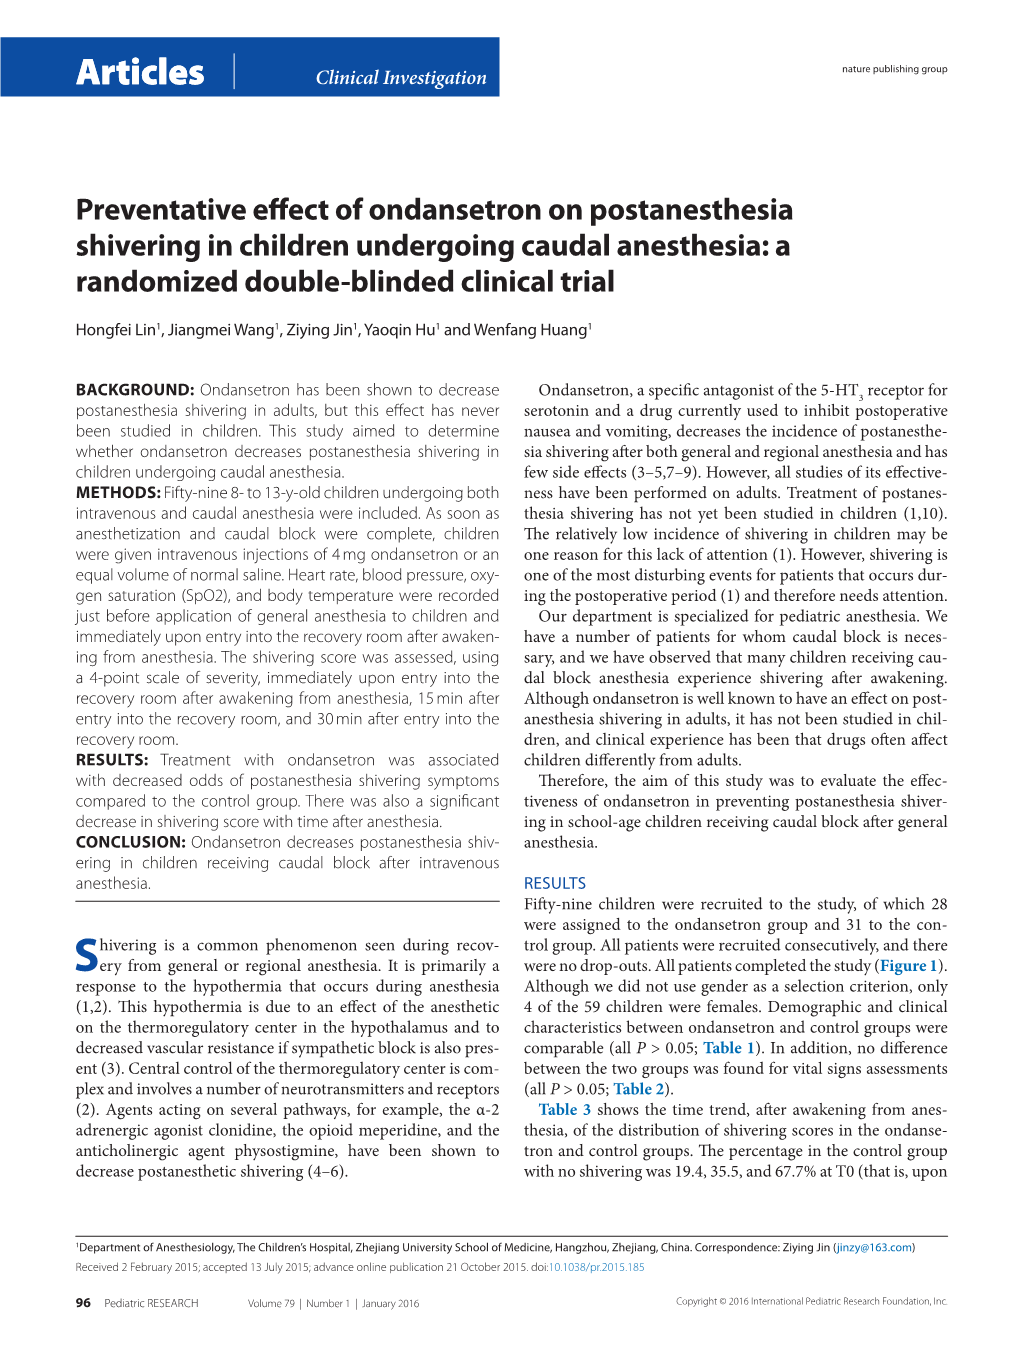 Preventative Effect of Ondansetron on Postanesthesia Shivering in Children Undergoing Caudal Anesthesia: a Randomized Double-Blinded Clinical Trial